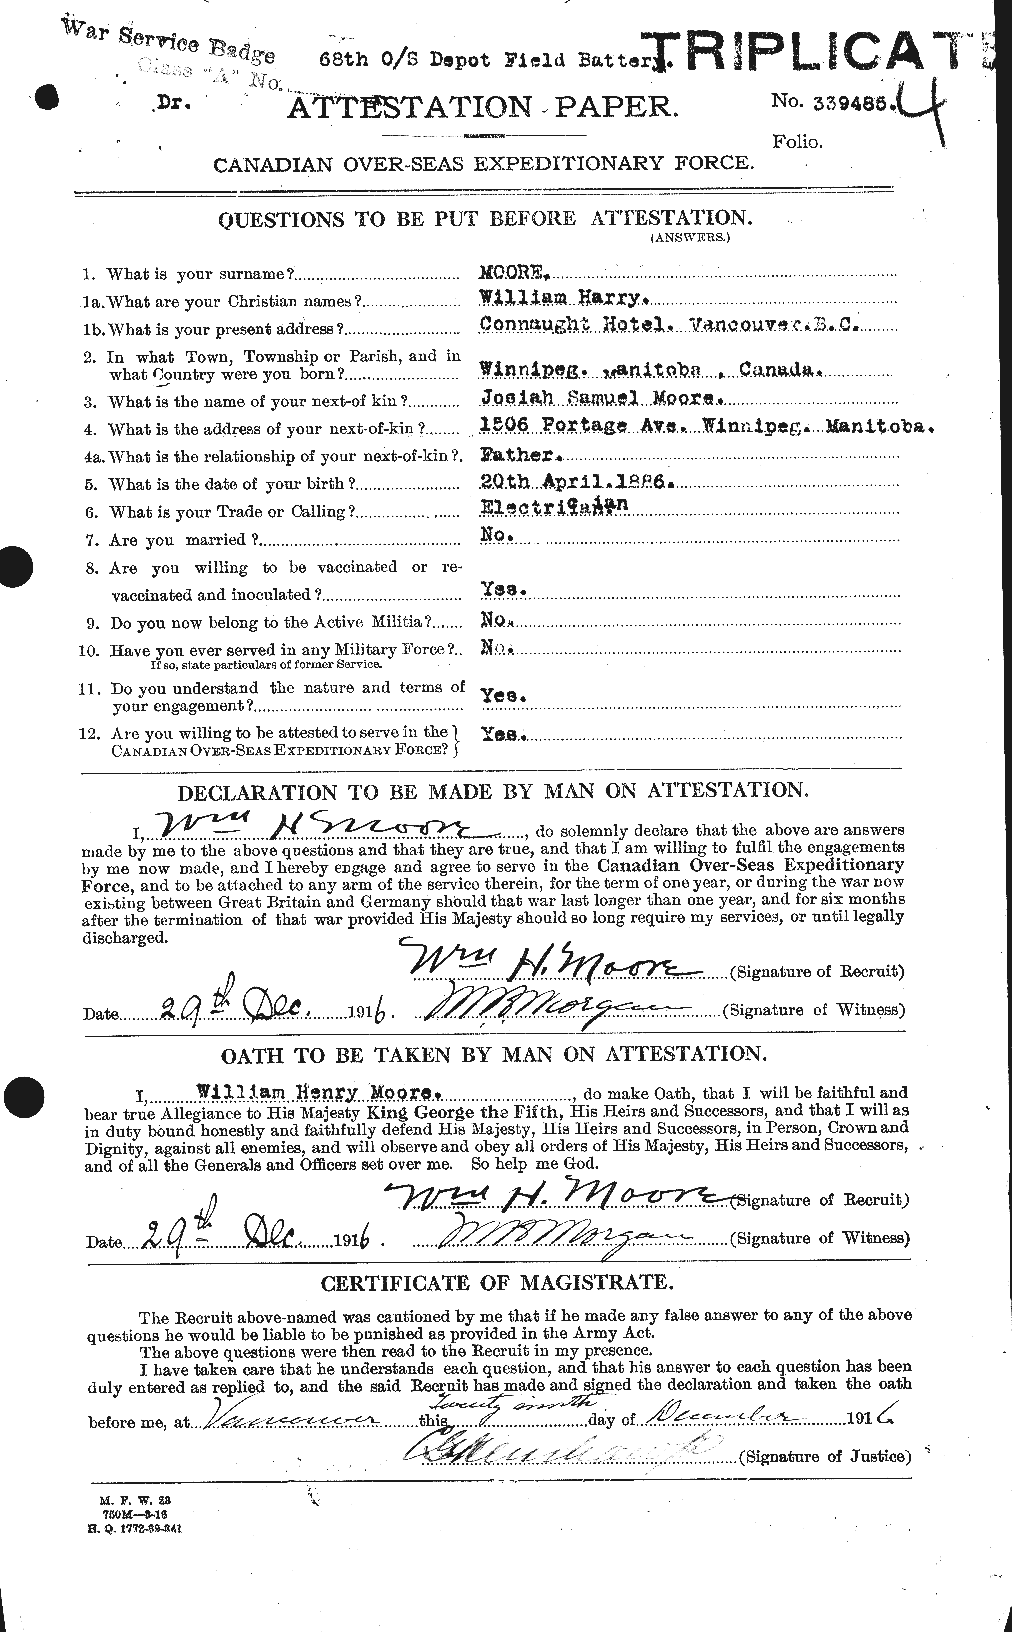 Personnel Records of the First World War - CEF 505818a